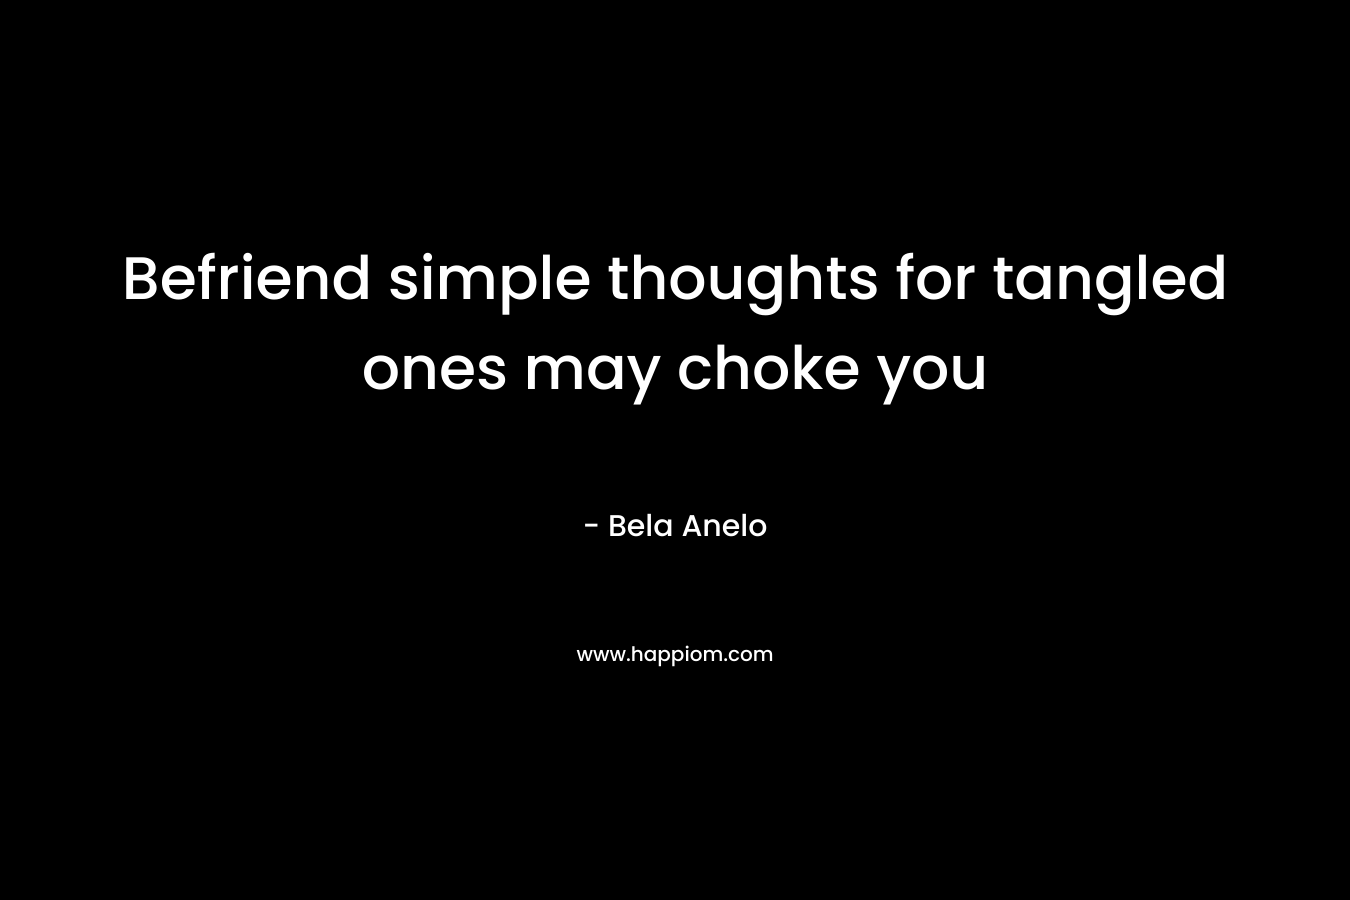 Befriend simple thoughts for tangled ones may choke you – Bela Anelo